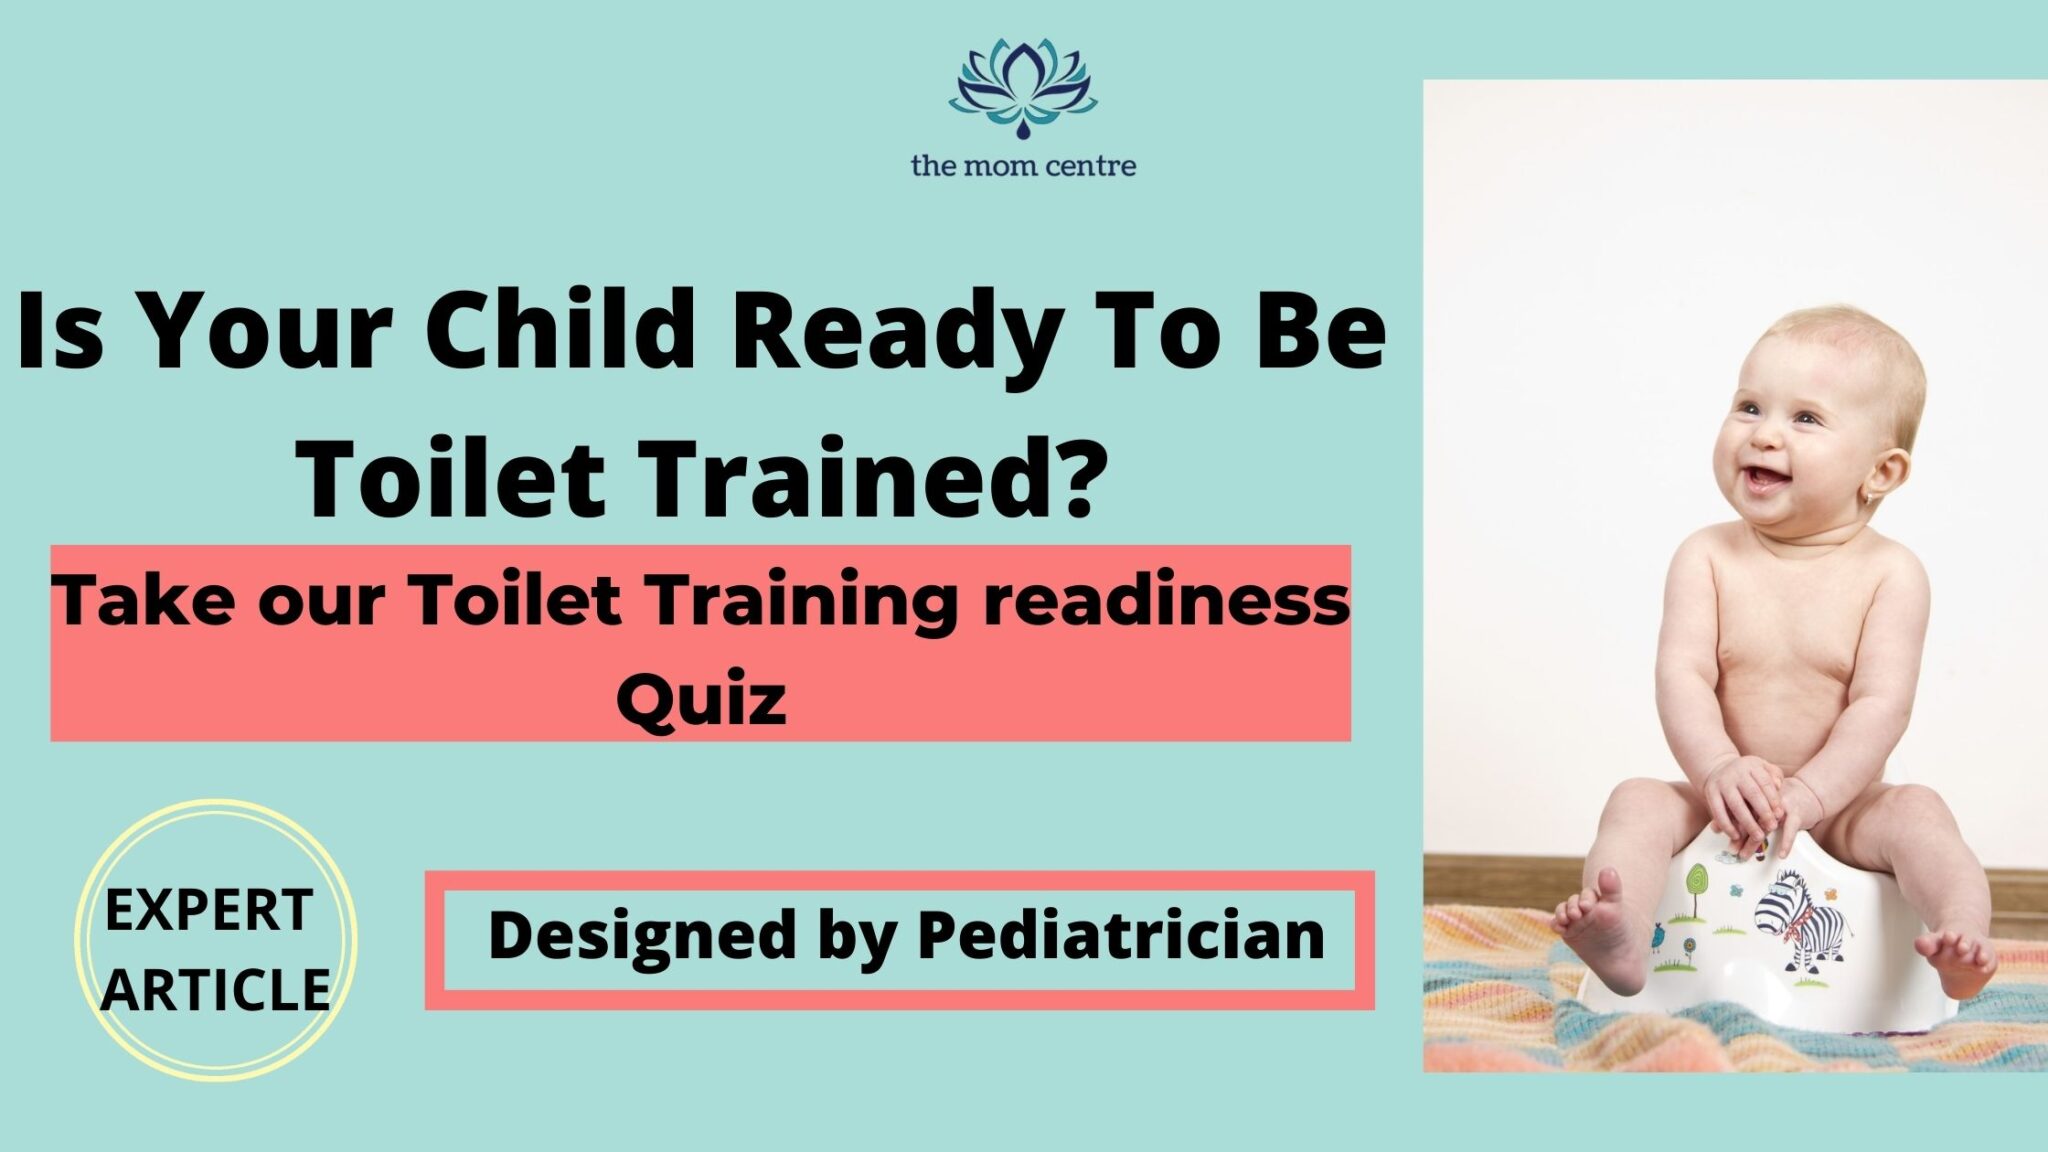 Is Your Child Ready To Be Toilet Trained? - the mom centre